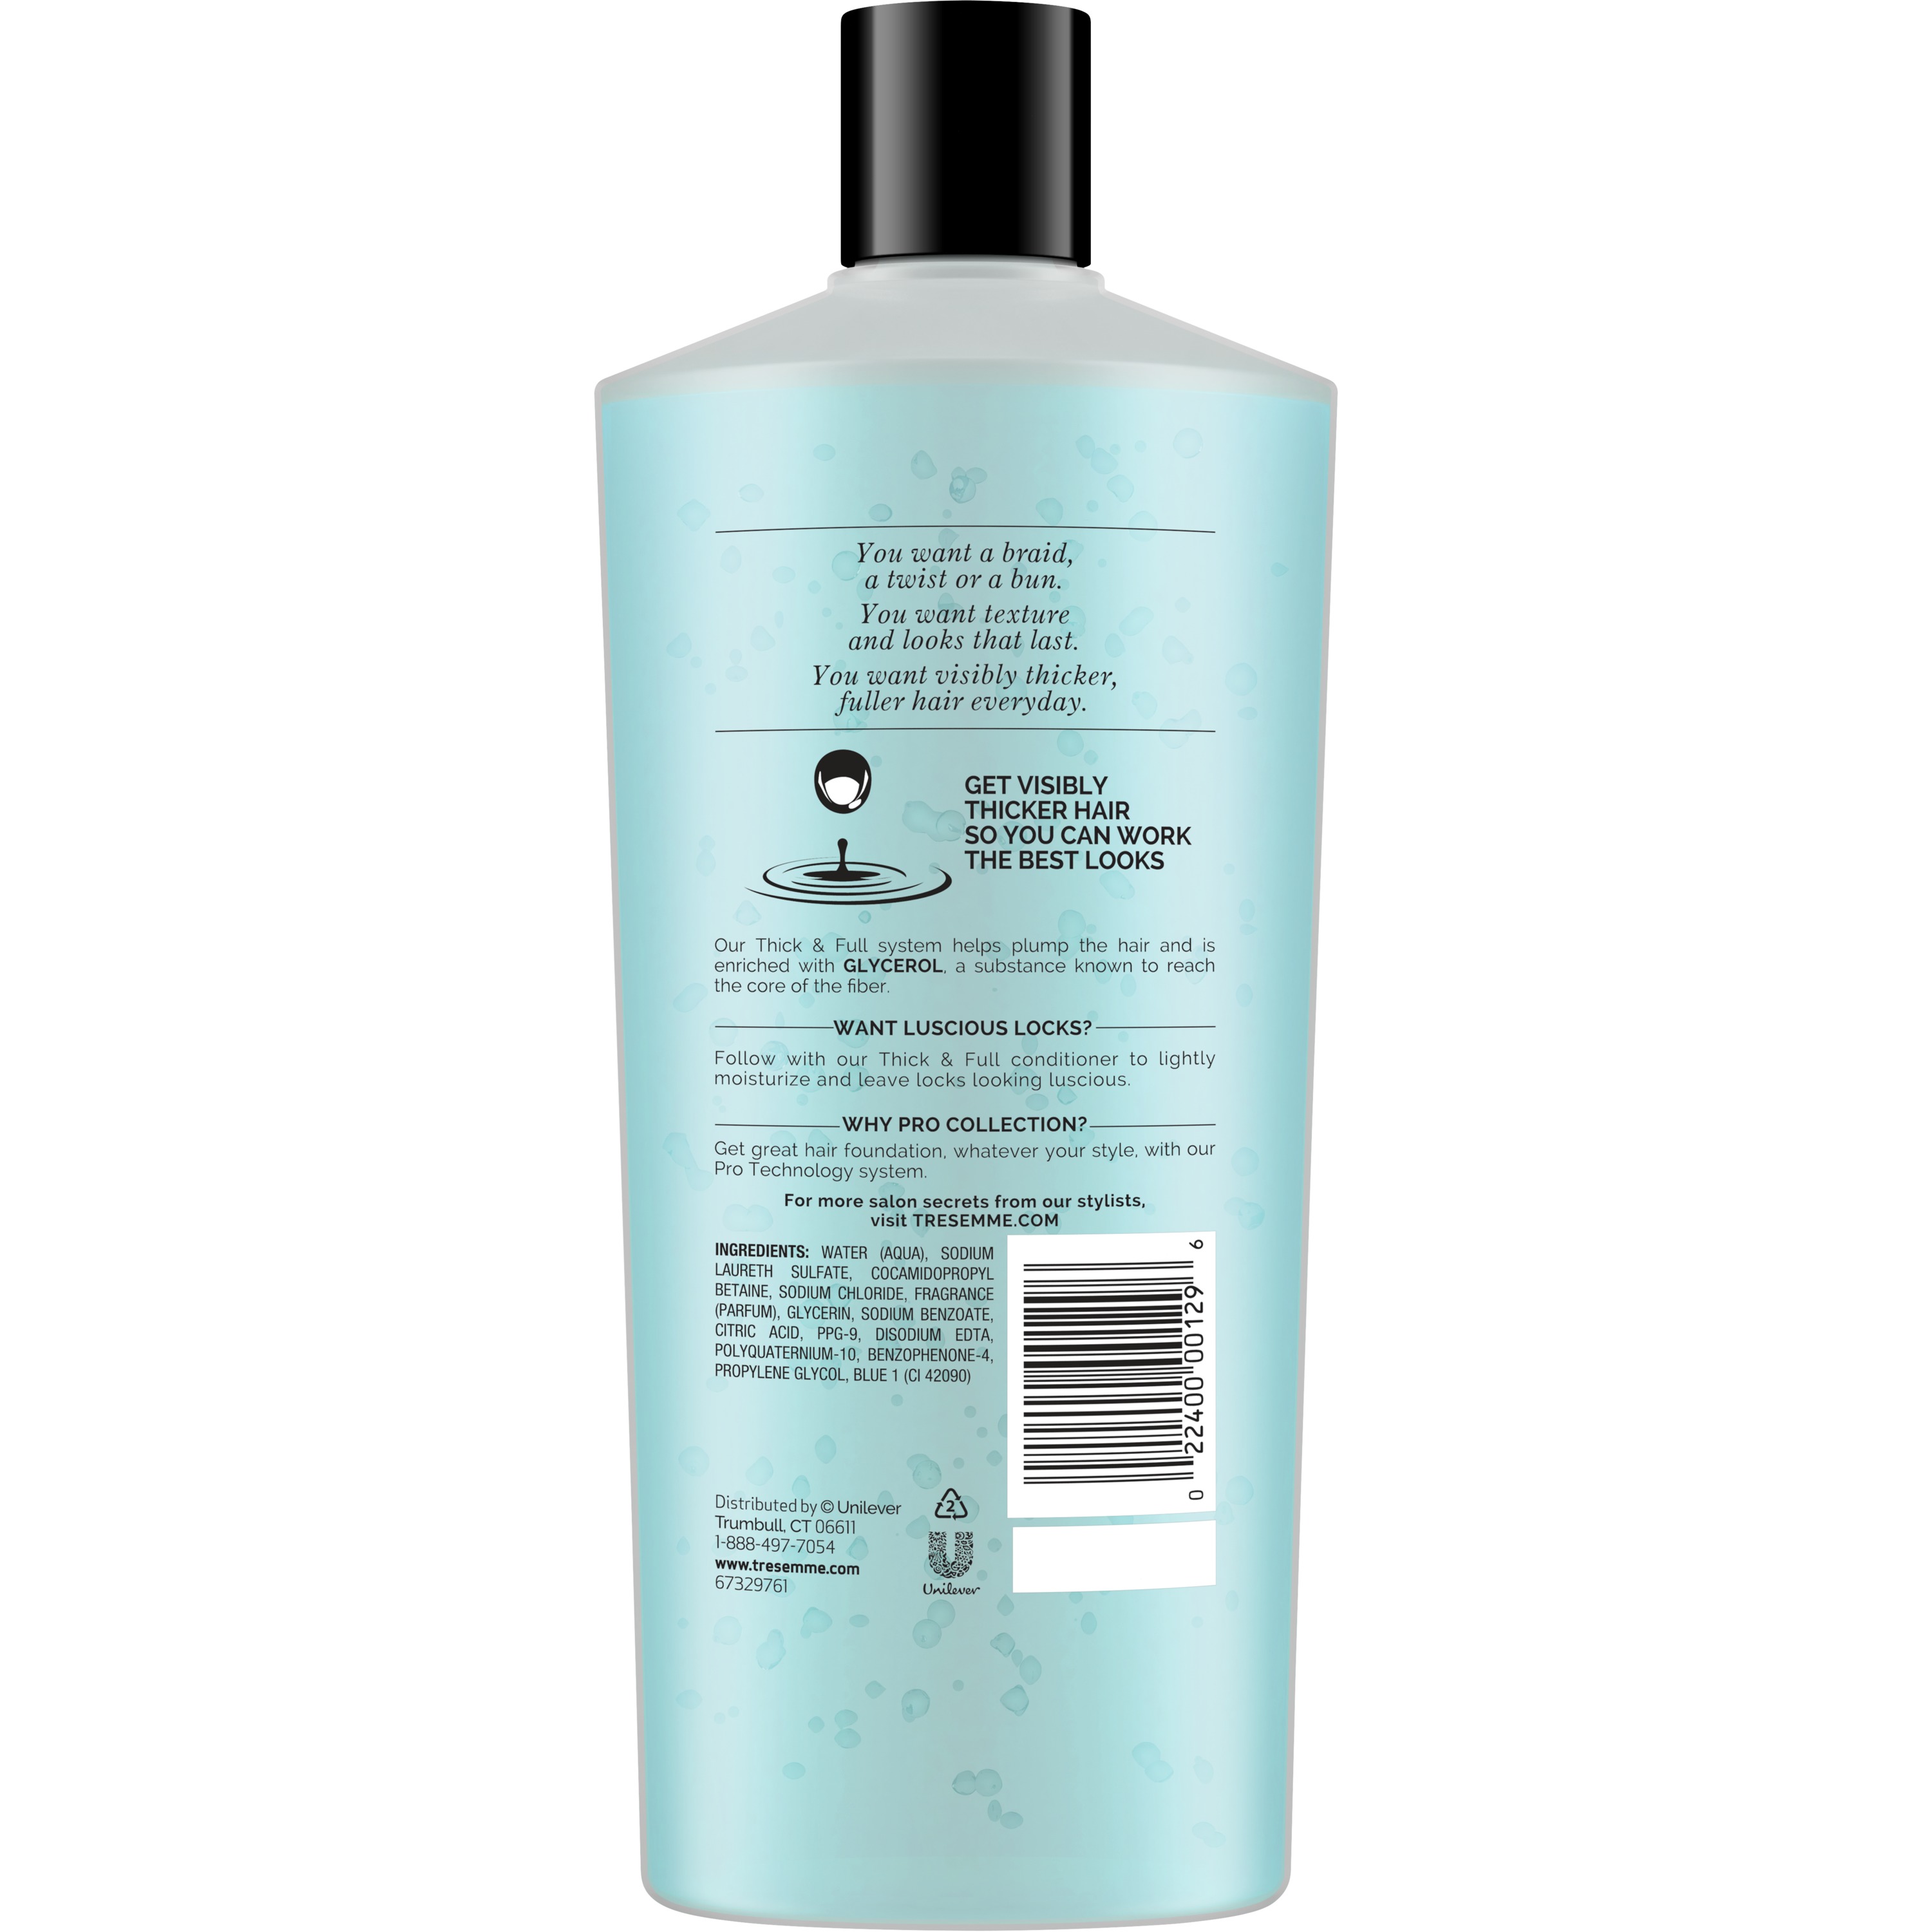 Tresemme Pro Collection Shampoo Thick and Full, 22 oz - image 2 of 9